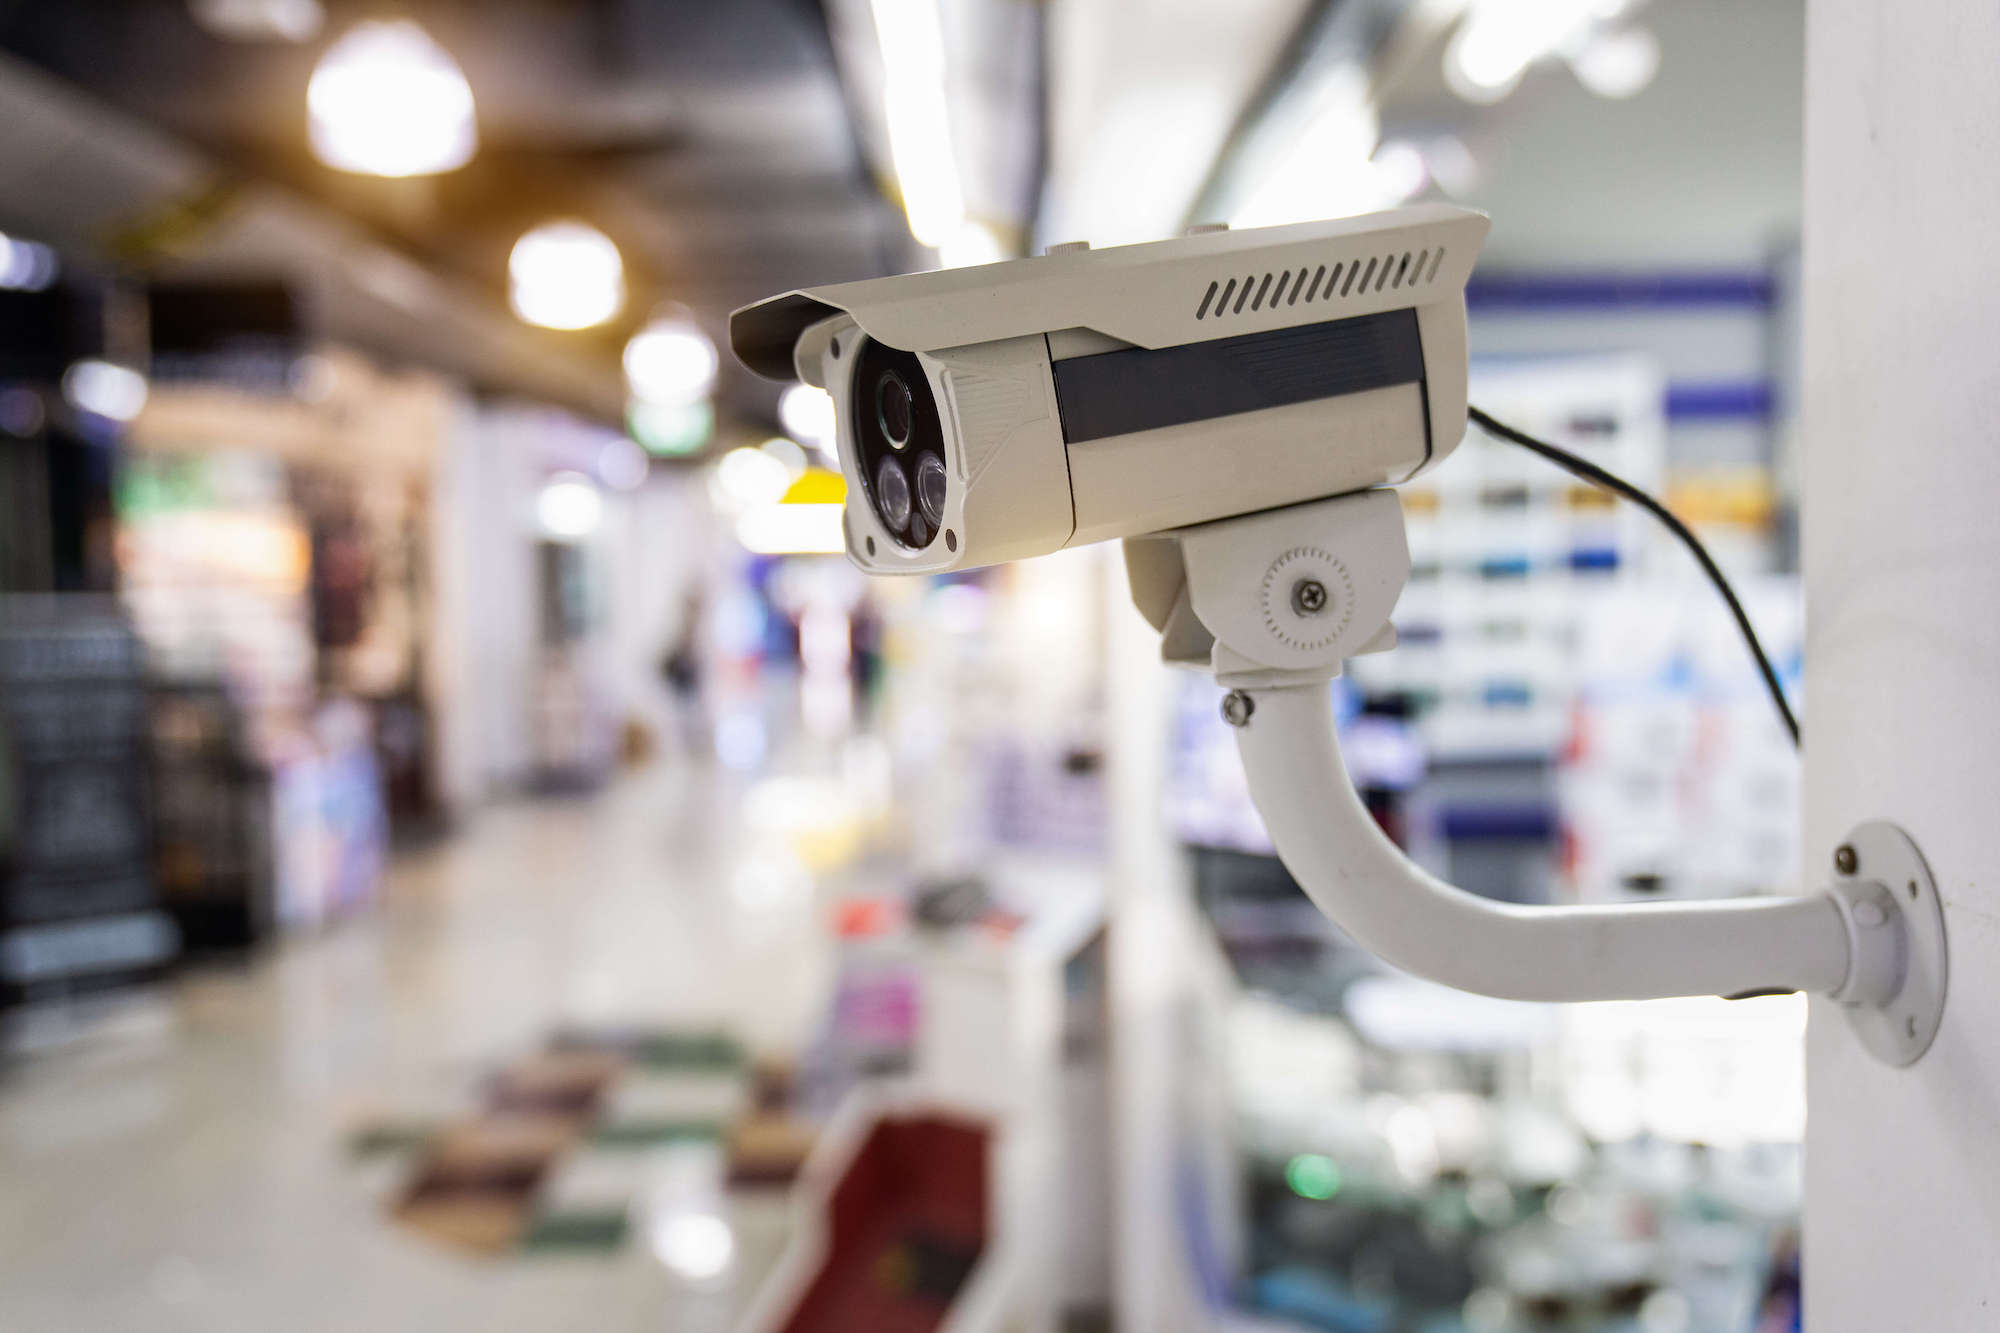 Smarter, Safer Malls Made Easy with IoT